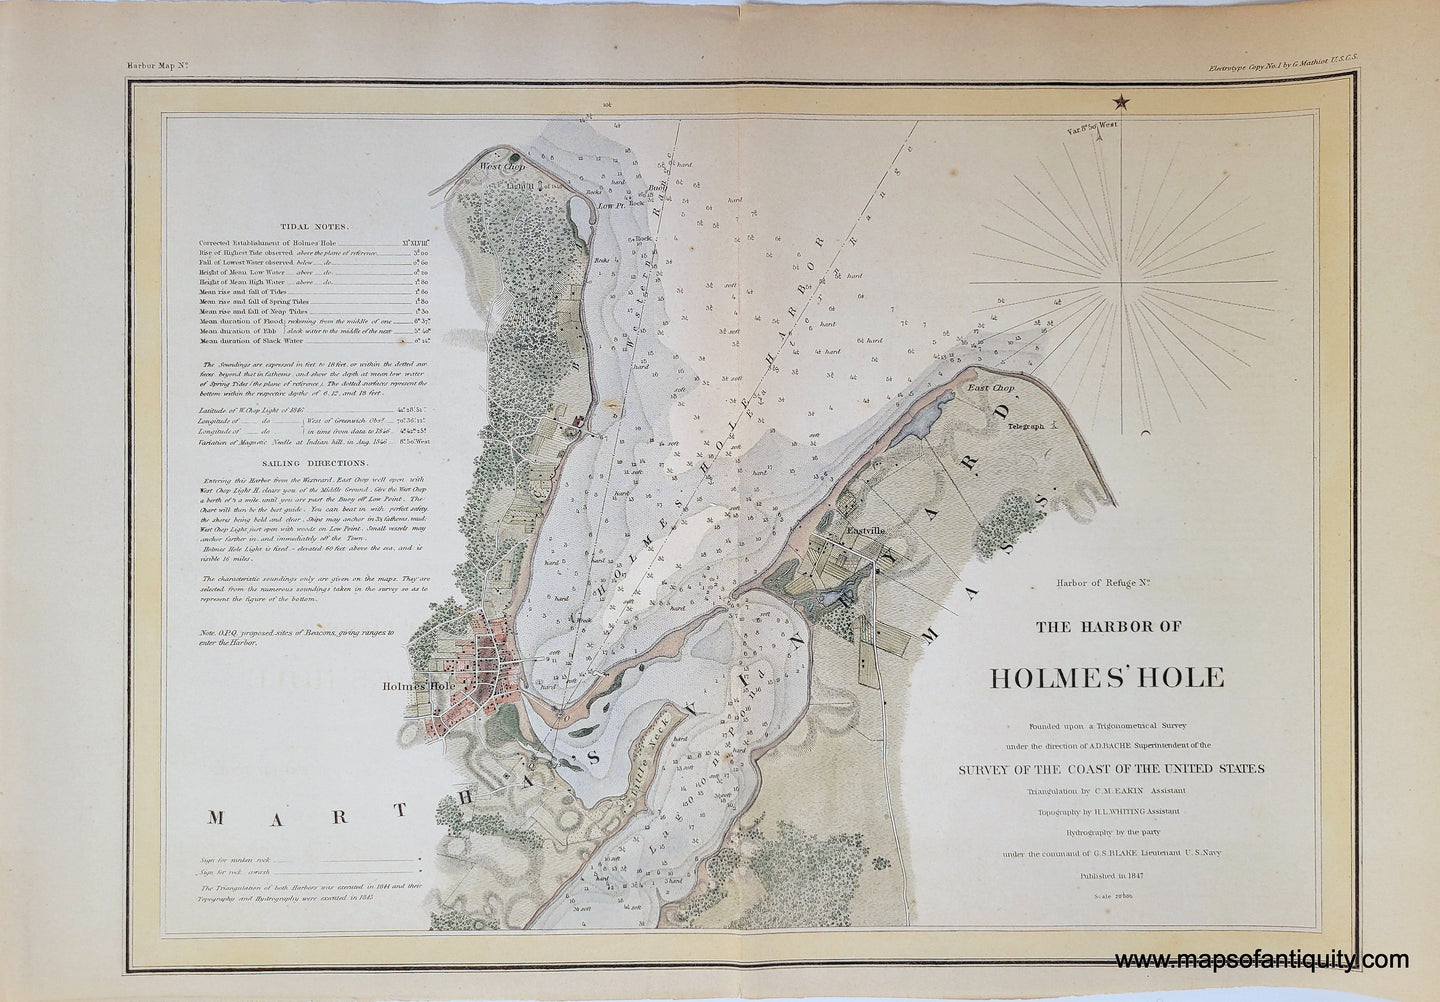 Hand-Colored-Antique-Nautical-chart-and-Map-The-Harbor-of-Holmes'-Hole**********-Massachusetts-Cape-Cod-and-Islands-1847-US-Coast-Survey-Maps-Of-Antiquity